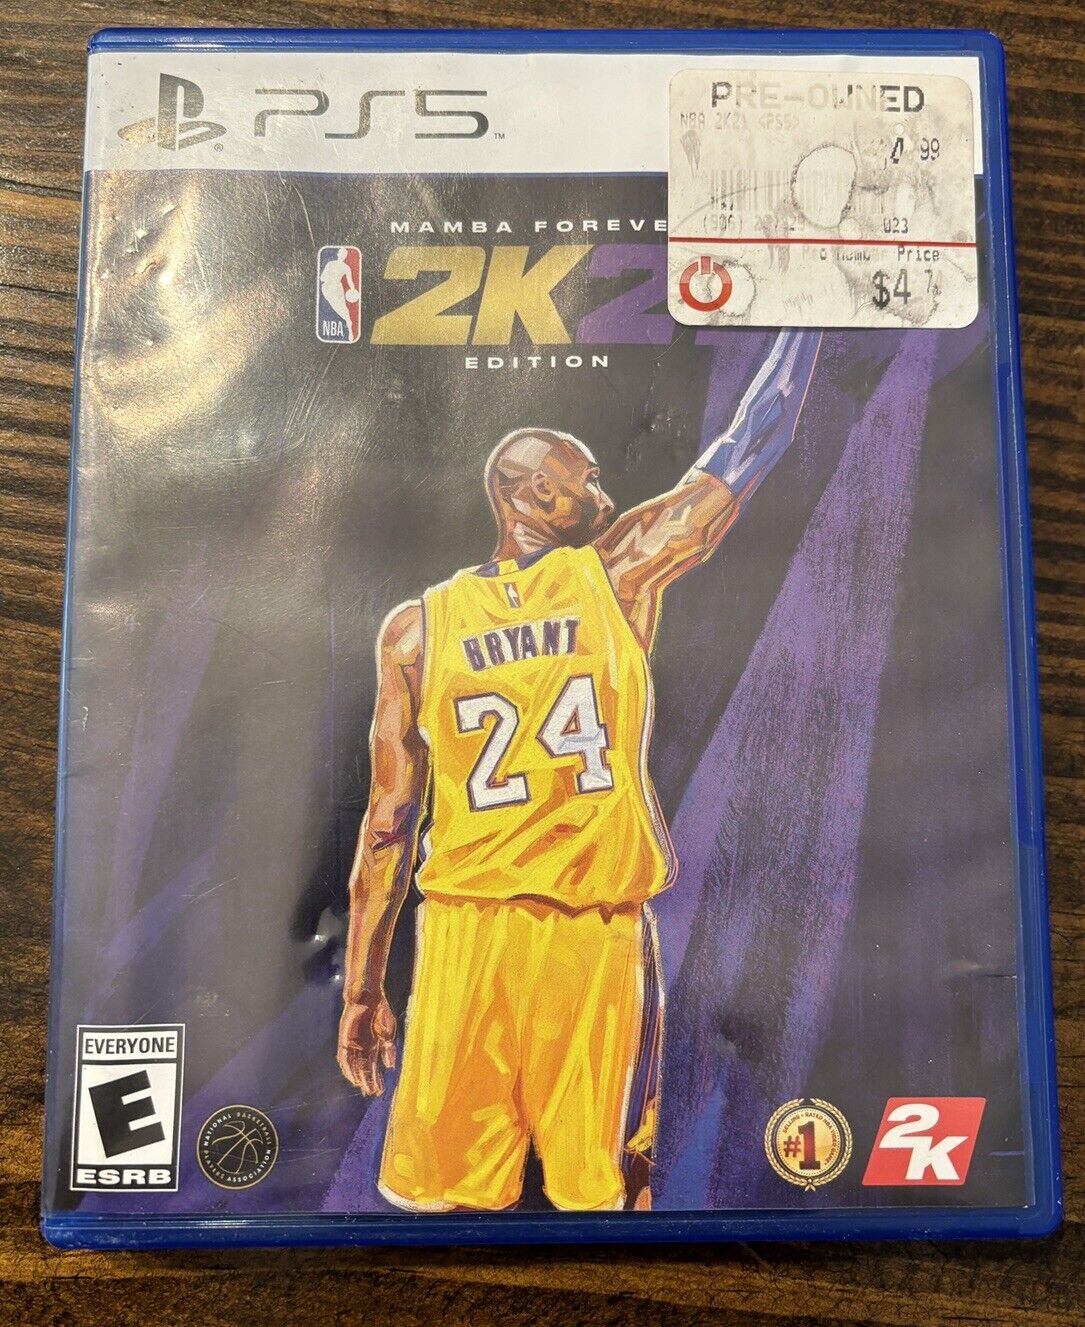 NBA 2K21 [Mamba Forever Edition] (Sony PlayStation 5 PS5, 2020) Case Insert Disc